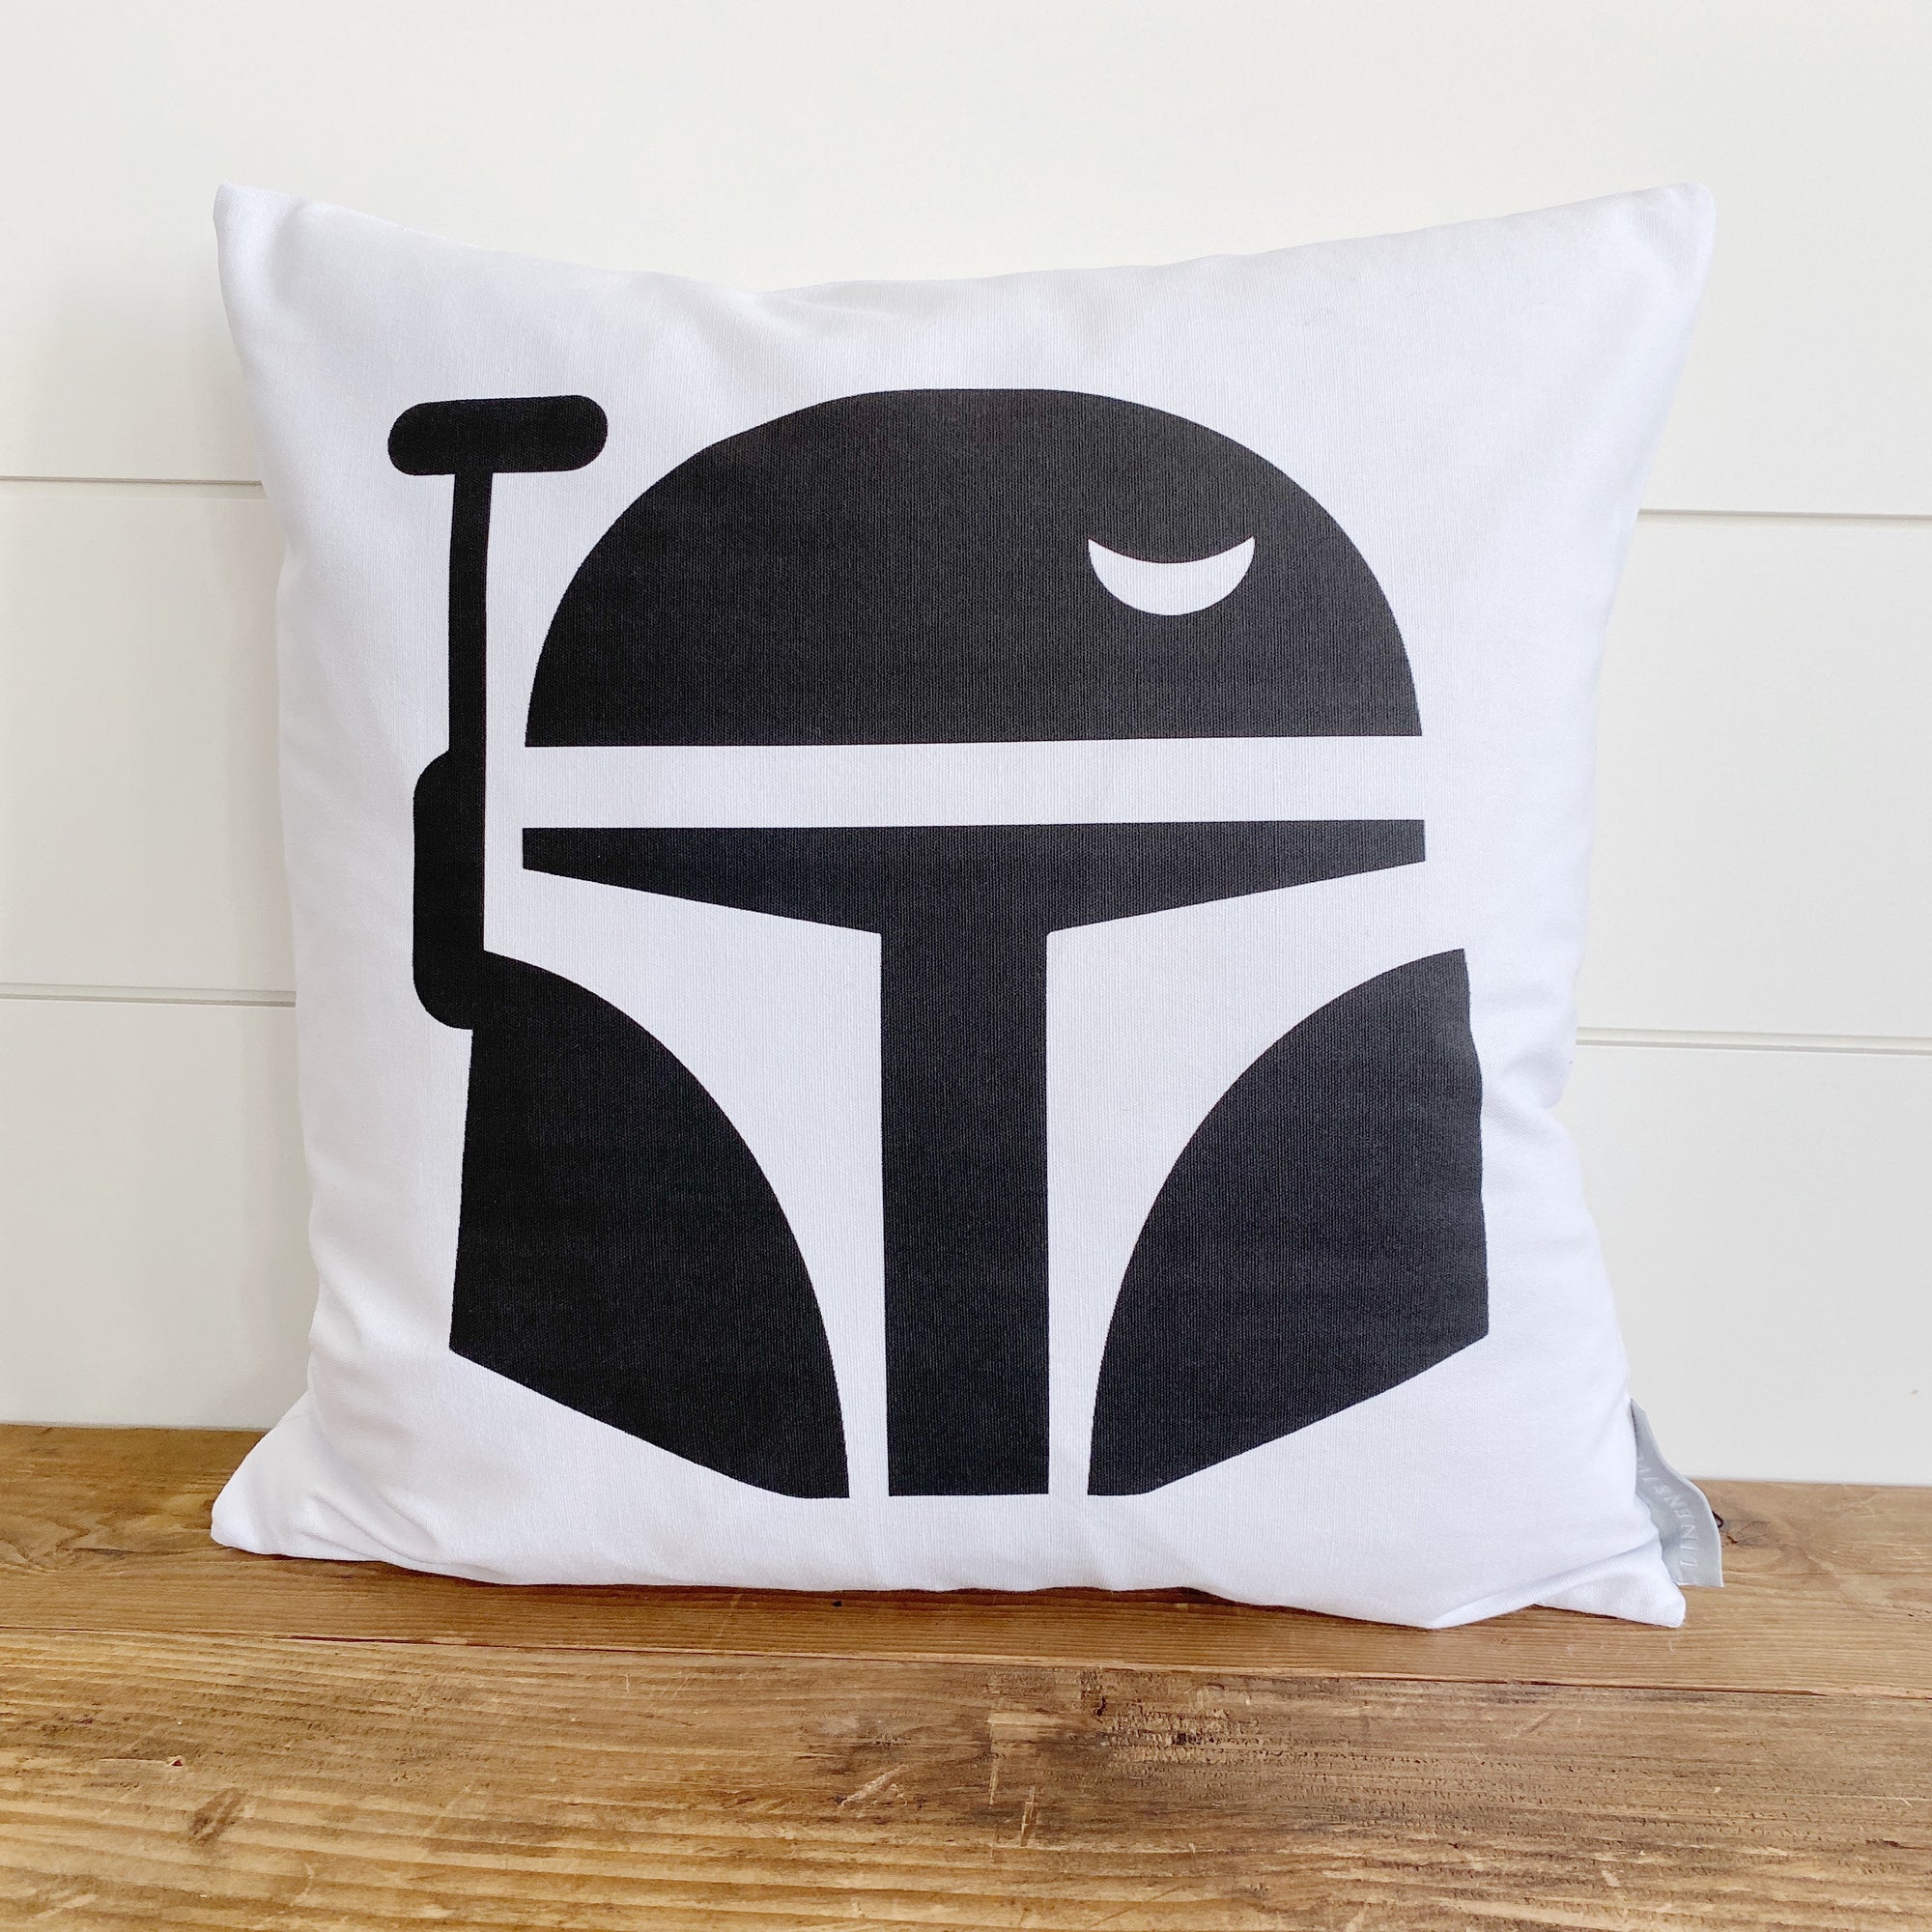 Mandalorian Pillow Cover - Linen and Ivory